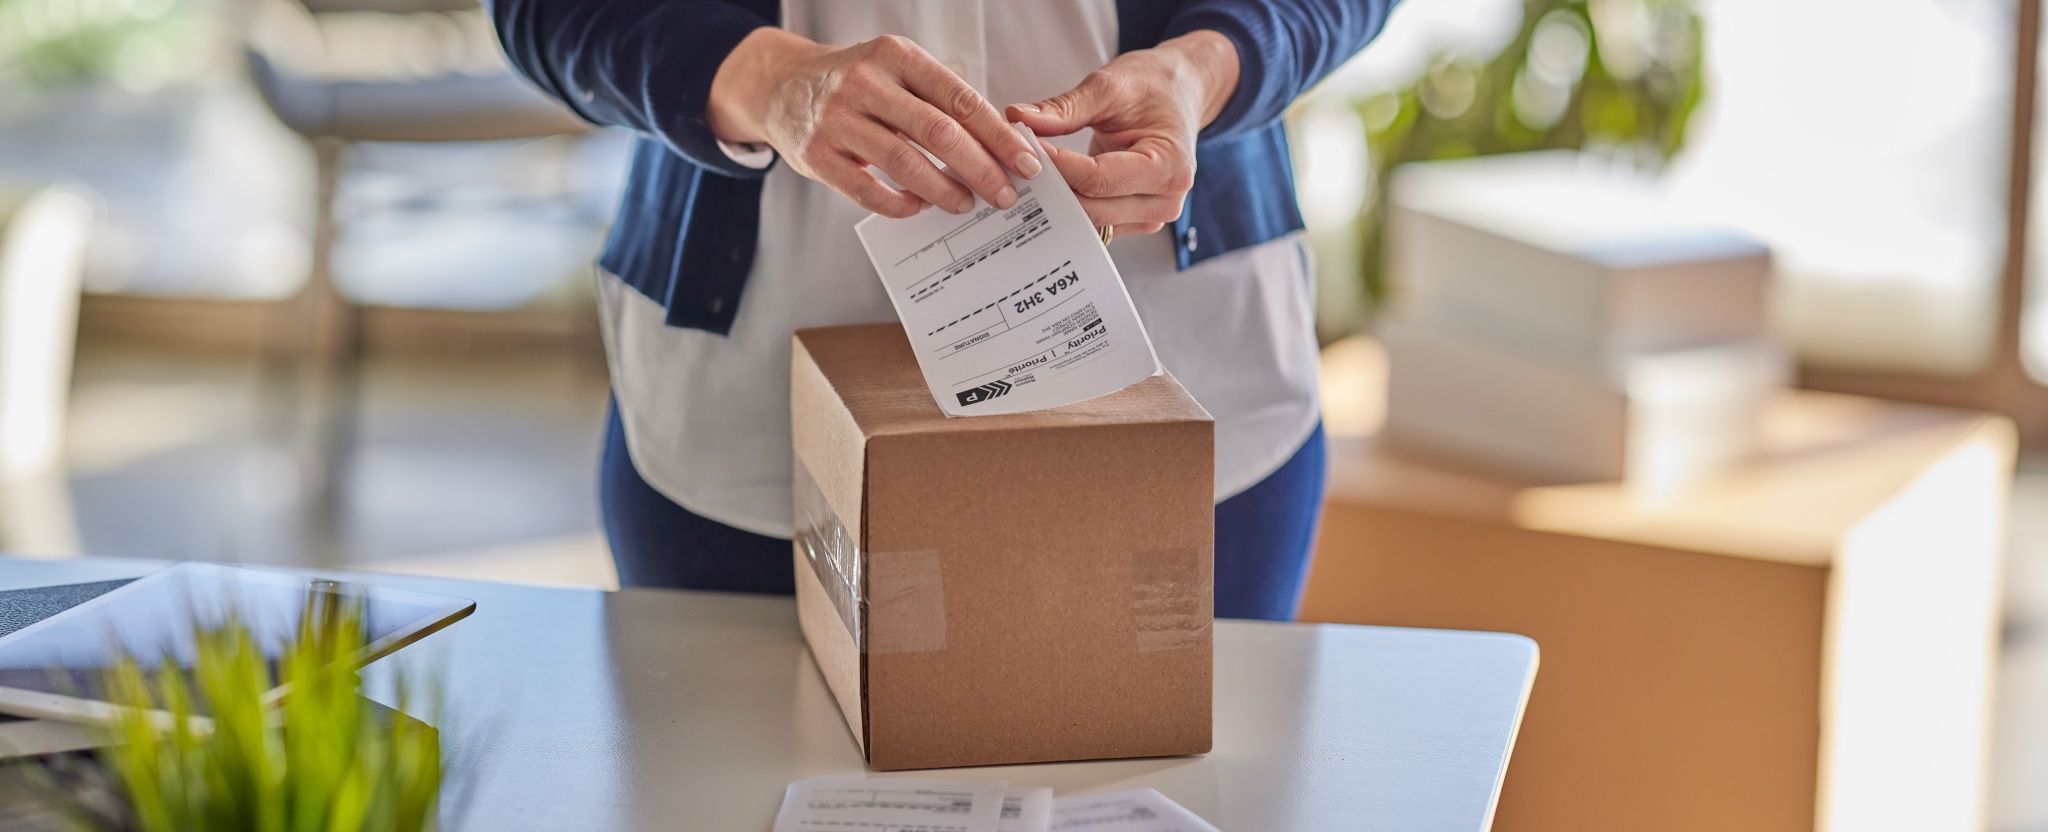 A woman stands in front of a table and applies a shipping label to a cardboard box.